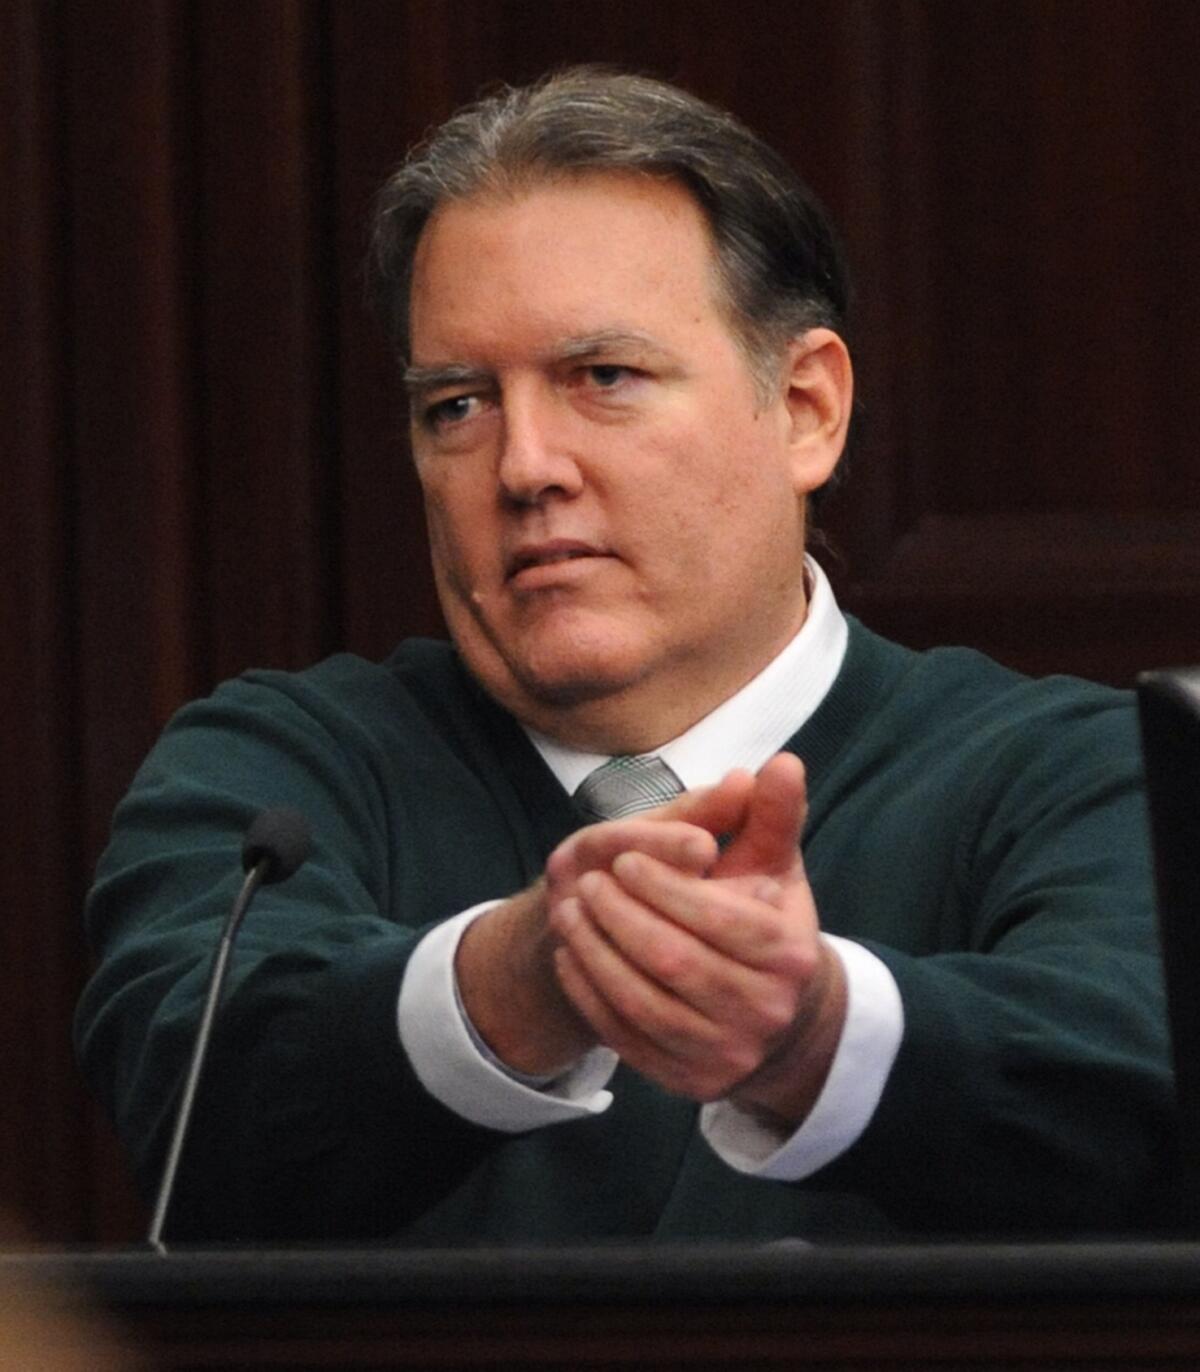 Michael Dunn on the stand during his trial in Jacksonville, Fla. The jury is now deliberating the case. Dunn is charged with murder in the fatal shooting of 17-year-old Jordan Davis after an argument over loud music.